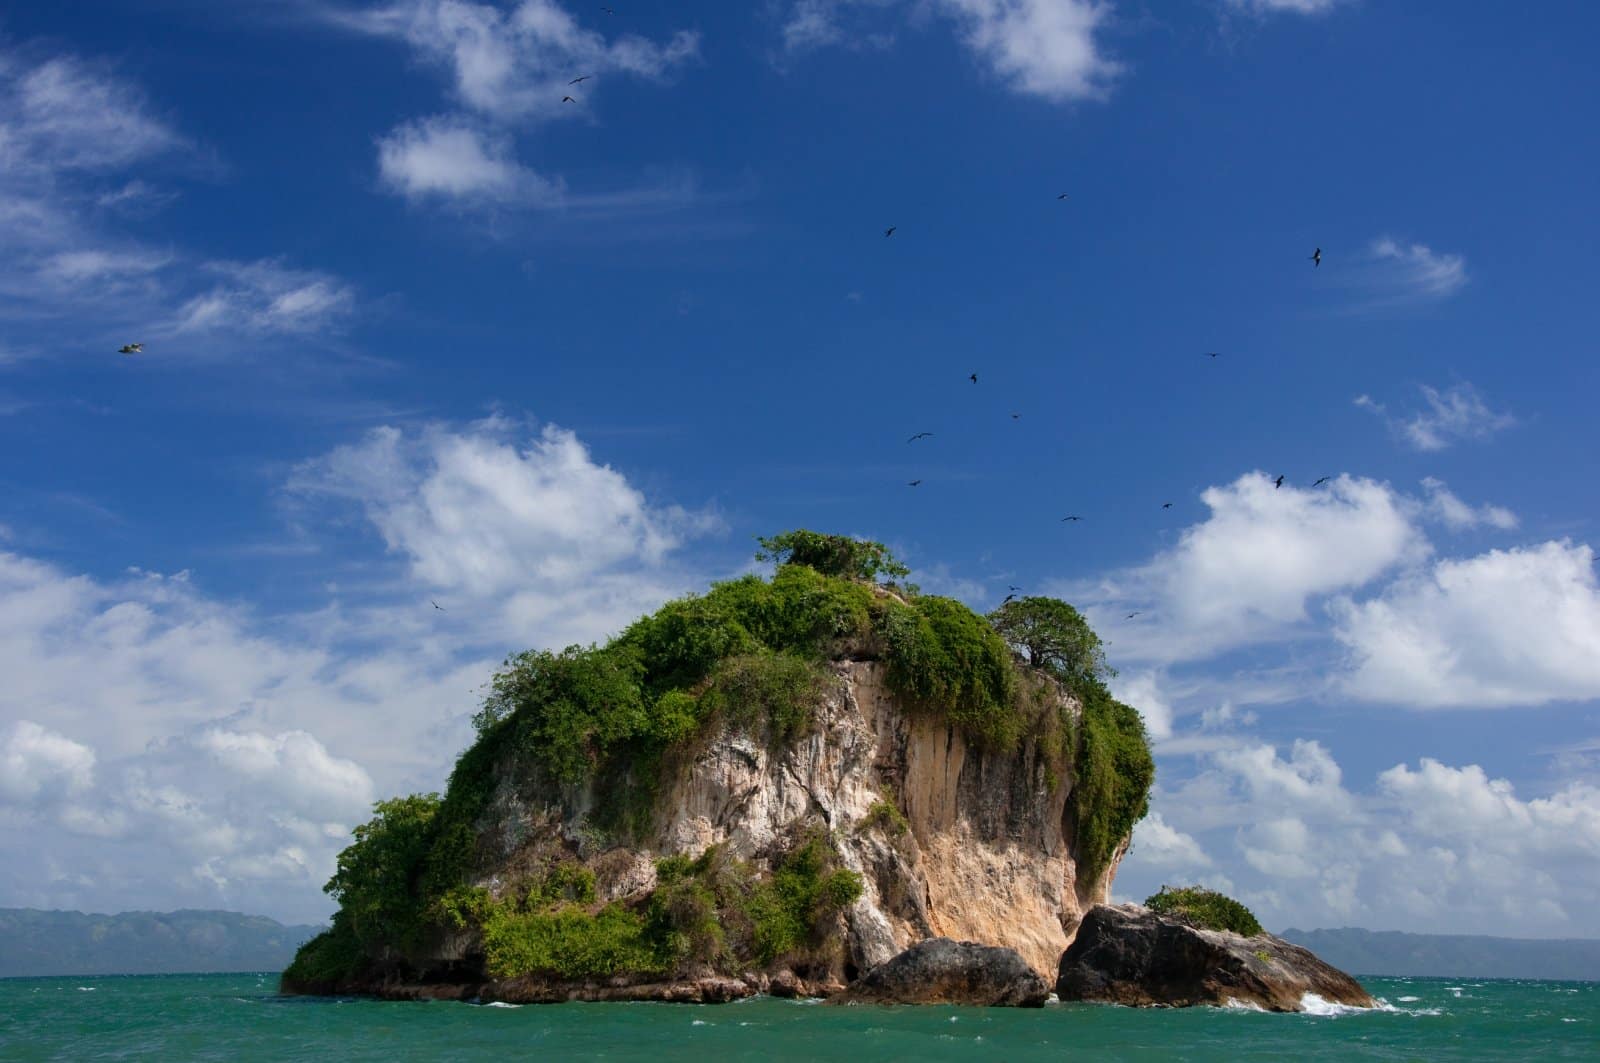 <p class="wp-caption-text">Image Credit: Shutterstock / Francois Gagnon</p>  <p><span>Los Haitises National Park, a sanctuary of ecological diversity and historical depth, offers an unparalleled glimpse into the Dominican Republic’s natural and cultural heritage. As you navigate through the park’s extensive mangrove forests by kayak, you’ll encounter a labyrinthine water world, home to a myriad of bird species, including the elusive Ridgway’s Hawk and the majestic frigate bird. The park’s rugged limestone karst landscape is dotted with caverns and sinkholes, many of which house ancient Taino petroglyphs, silently narrating the island’s pre-Columbian history. The exploration of these caves reveals the spiritual and daily life of the Taino people through their art. Above ground, the dense rainforest canopy teems with life, offering hiking trails that lead to hidden waterfalls and secluded springs, embodying the park’s commitment to preserving the island’s biodiverse ecosystems.</span></p>